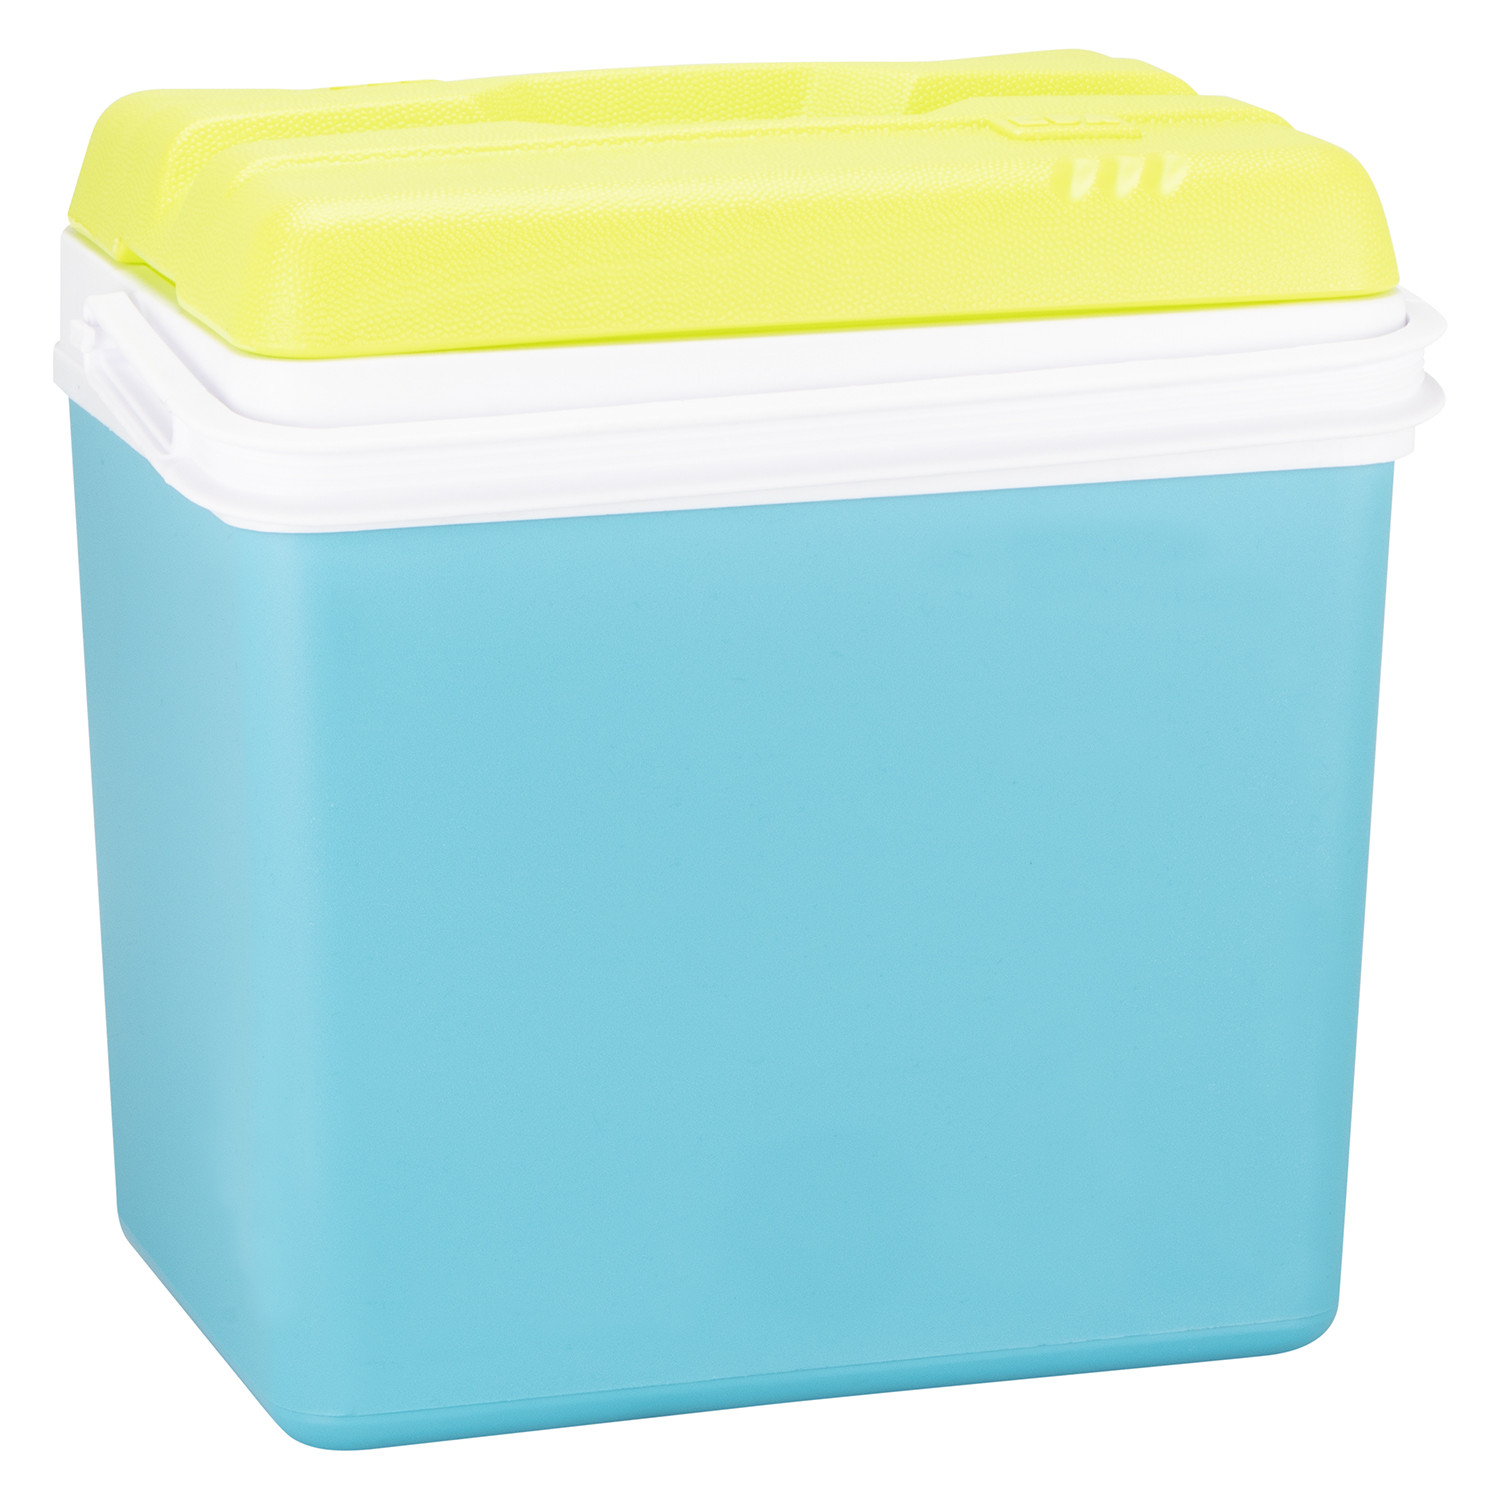 Turquoise and Green Ice Box 24L Image 1